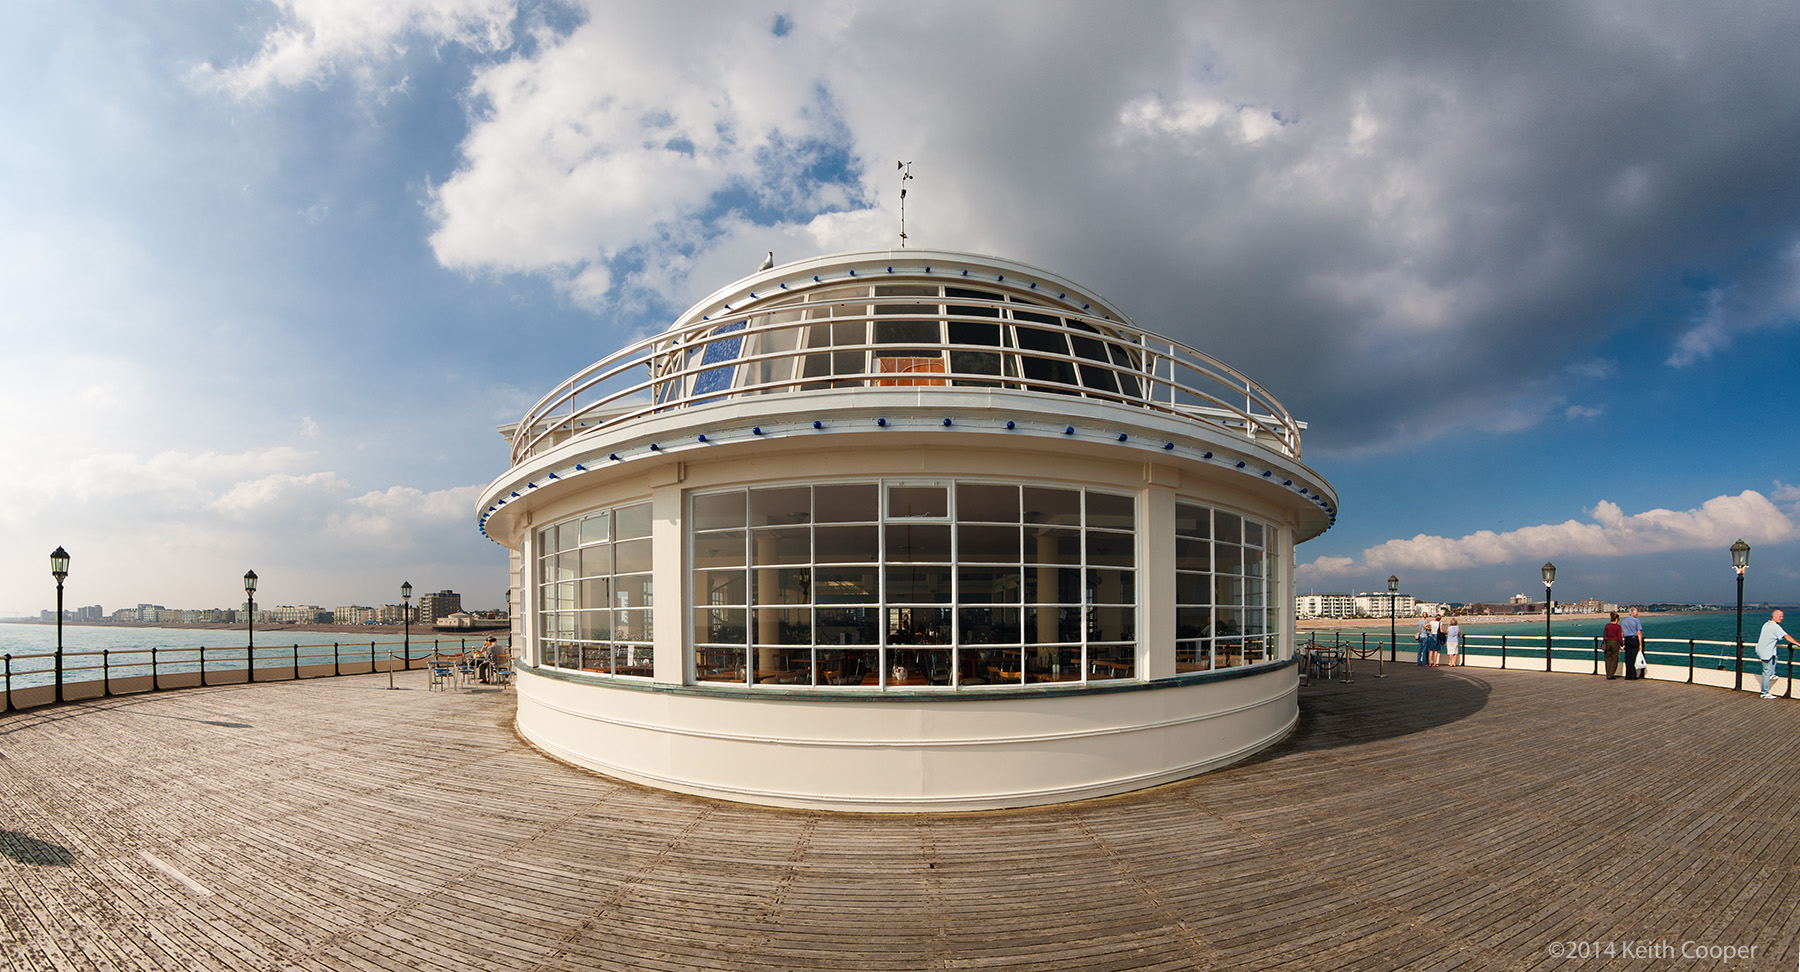 Restaurant at the end of the pier, Worthing